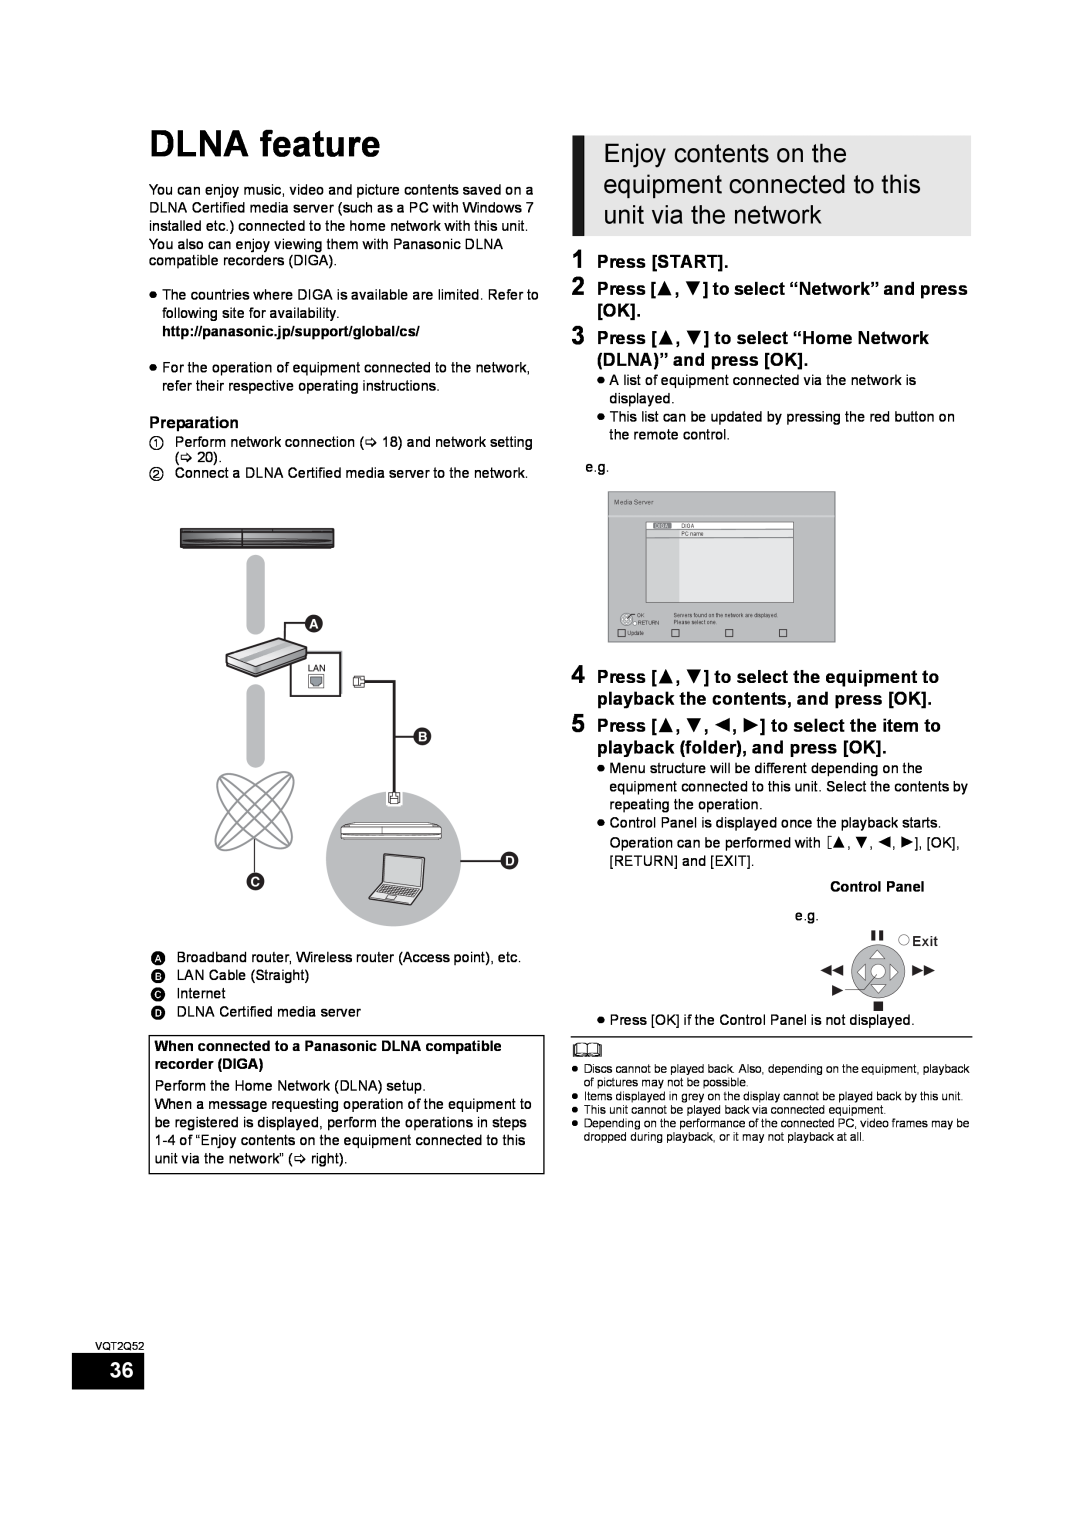 Philips SC-BT735 operating instructions DLNA feature,    , Press 3, 4 to select “Network” and press OK, Press START 